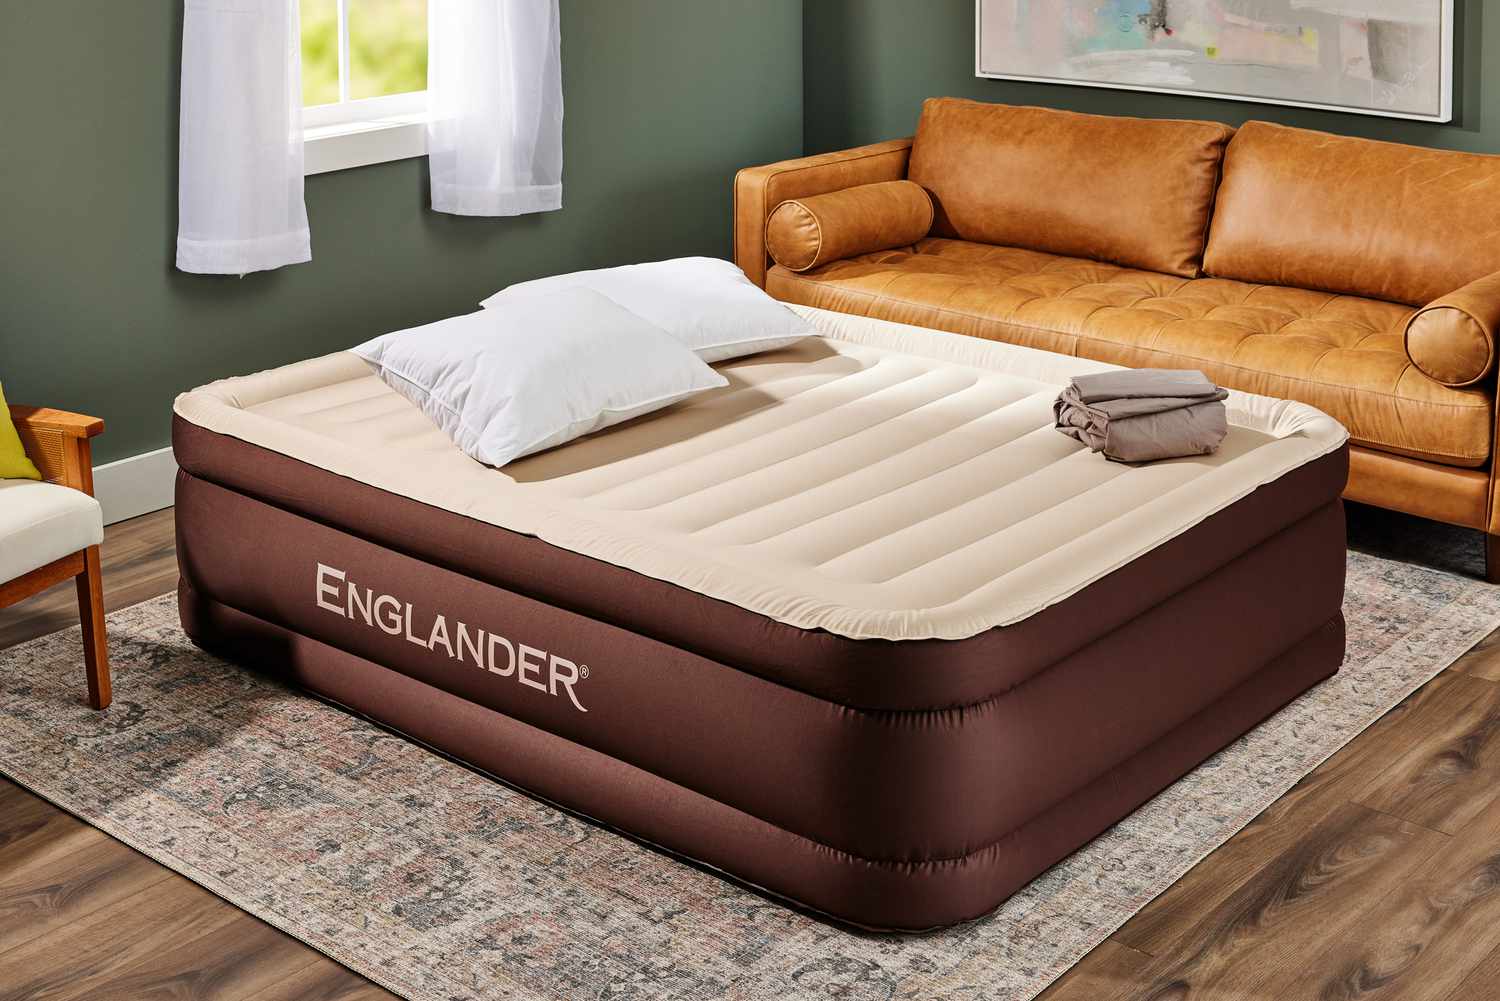 The Englander Air Mattress w/Built in Pump fully inflated near a couch